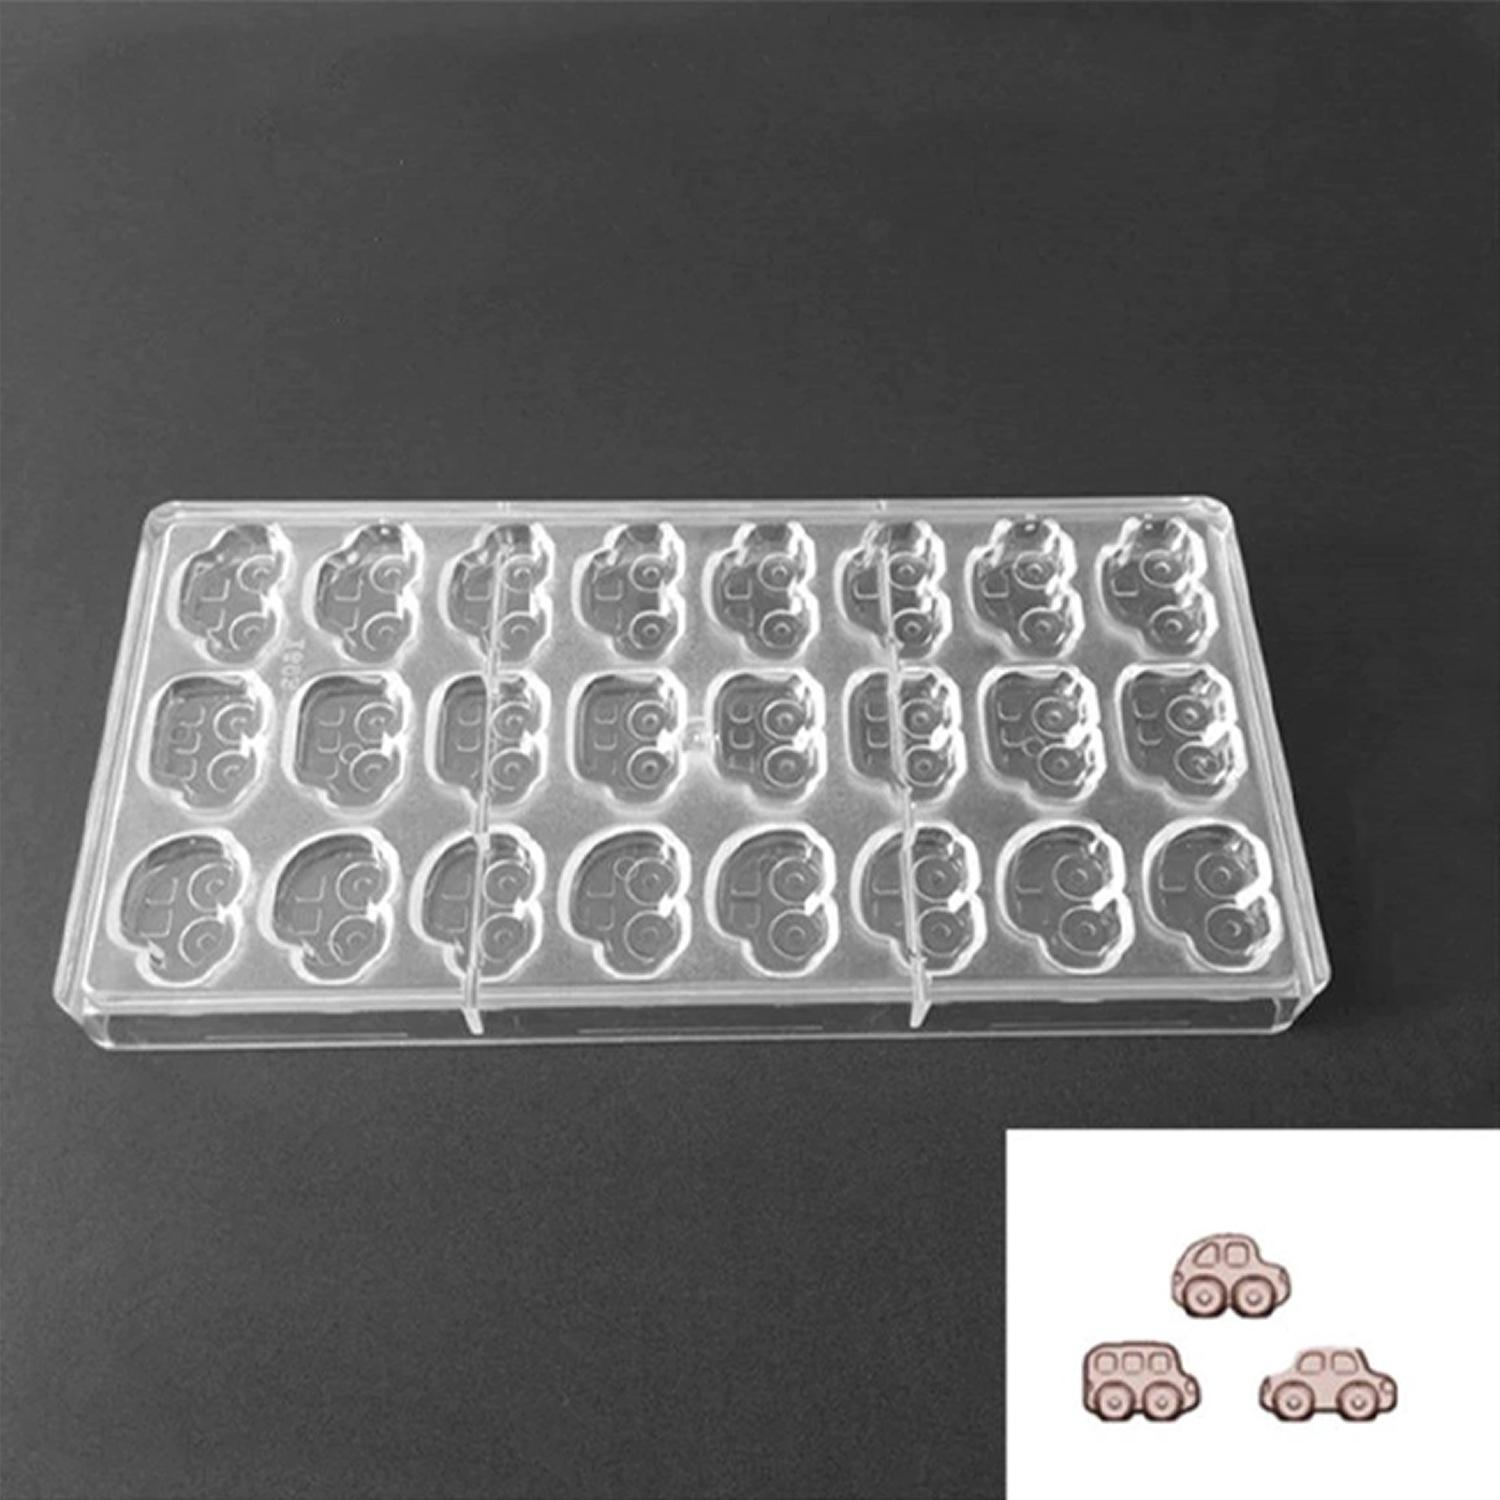 PCM0005 CUTE CAR SHAPED PLASTIC CANDY CHOCOLATE MOLD